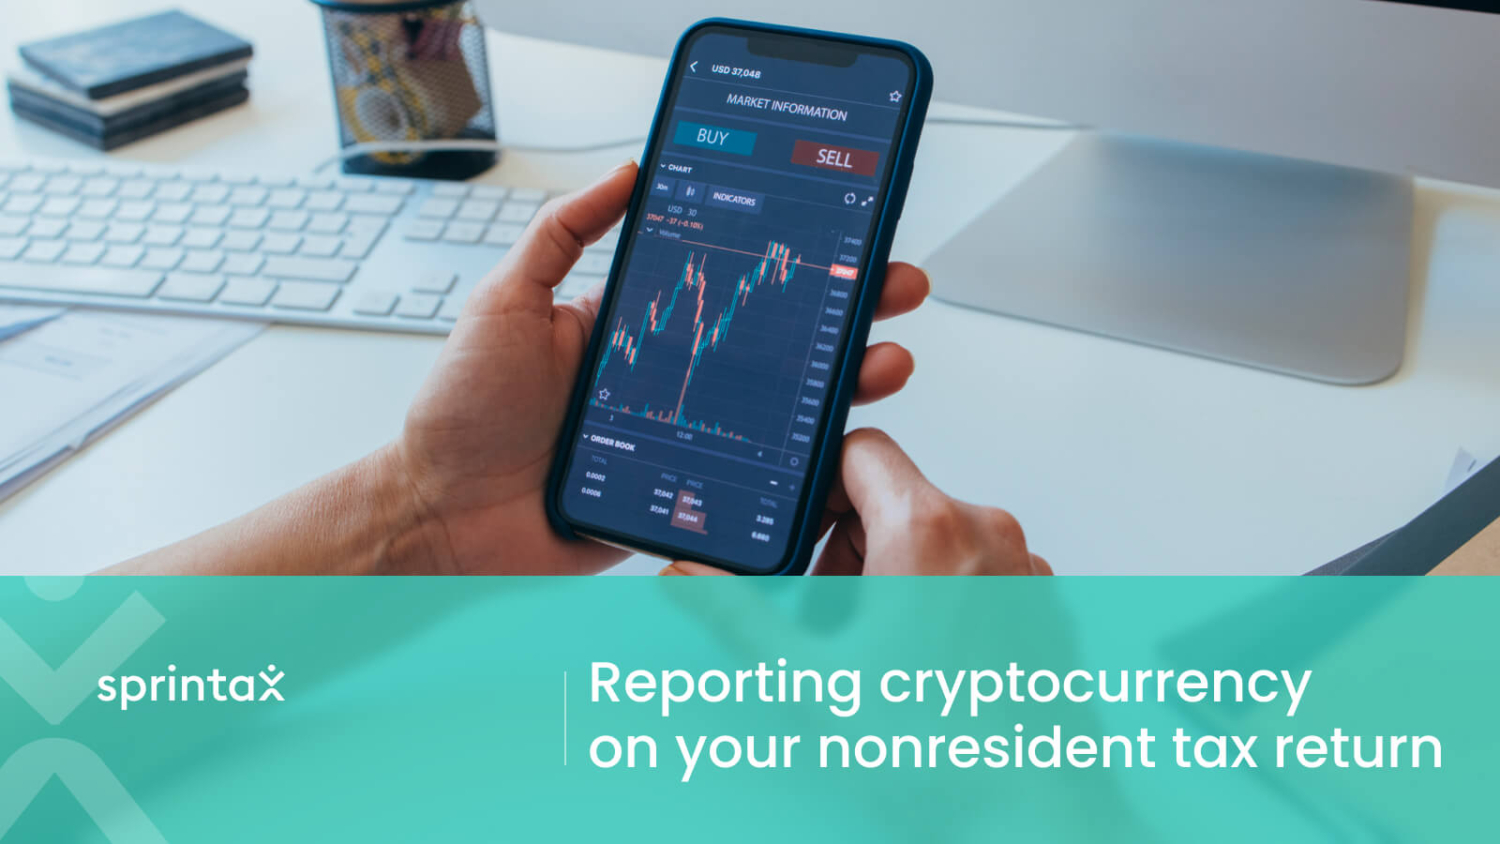 Reporting cryptocurrency on nonresident tax return